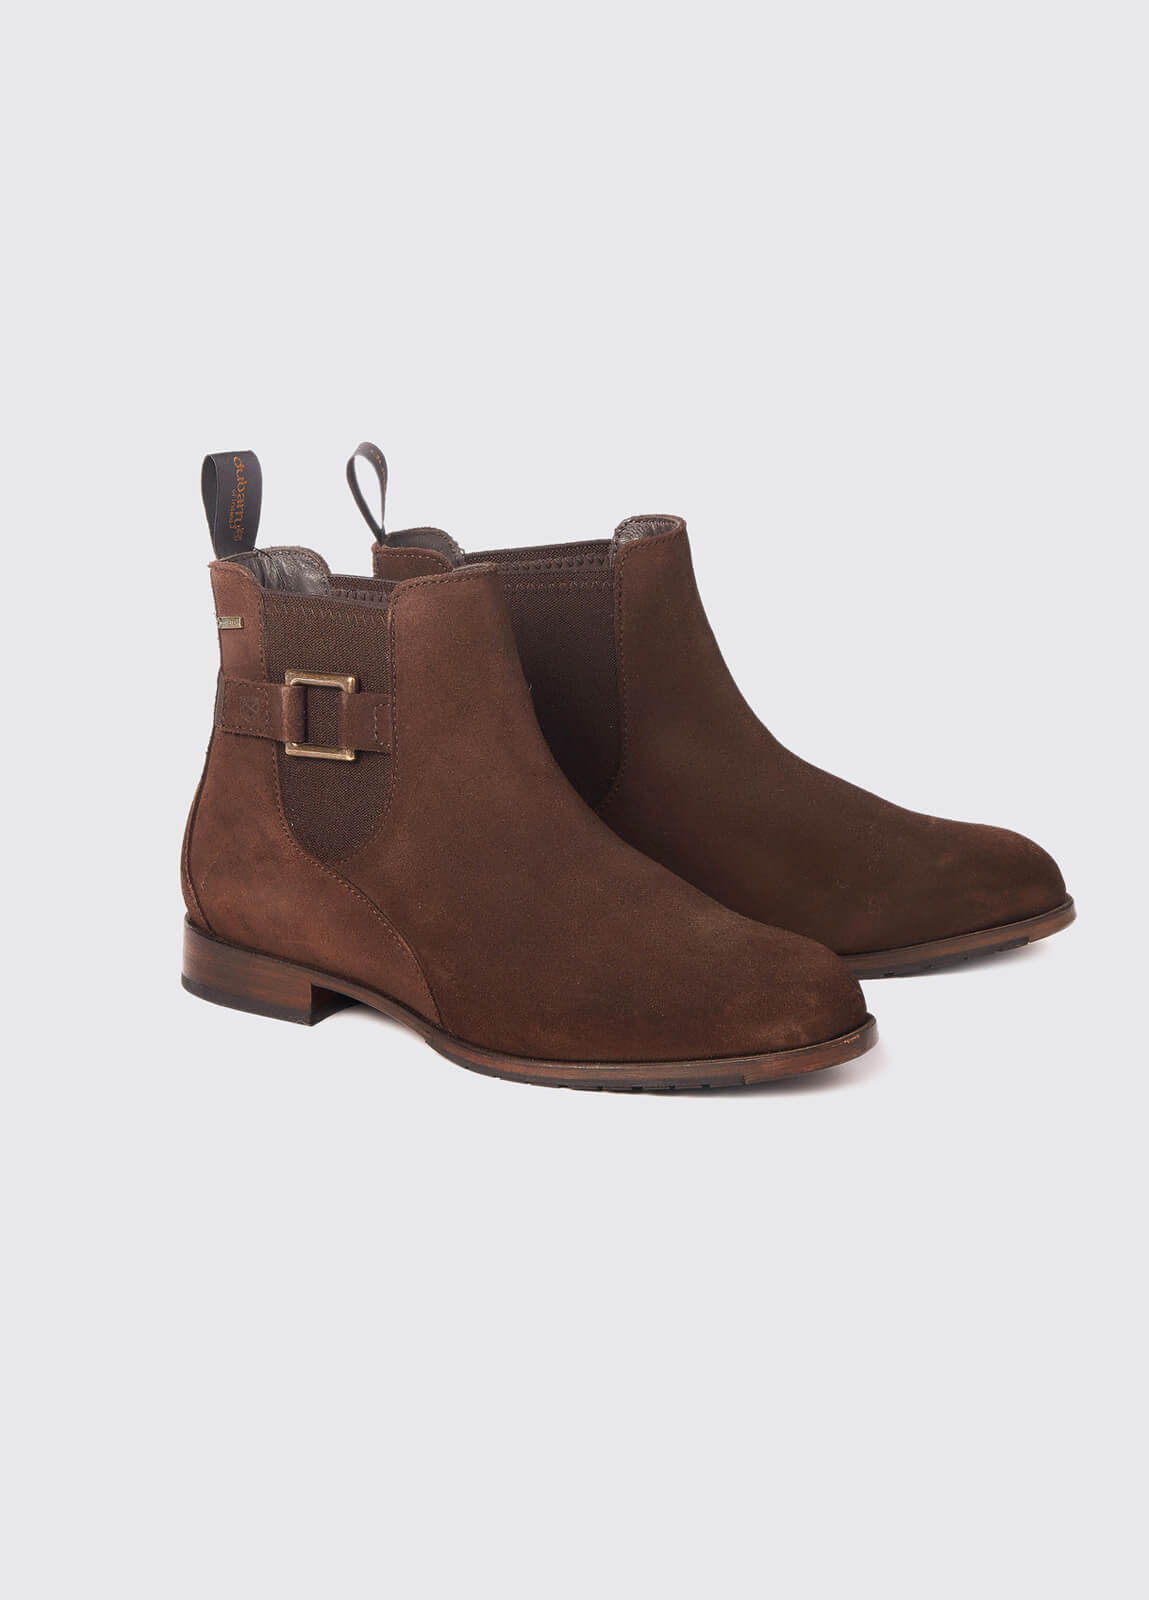 Monaghan Leather Soled Boot - Cigar